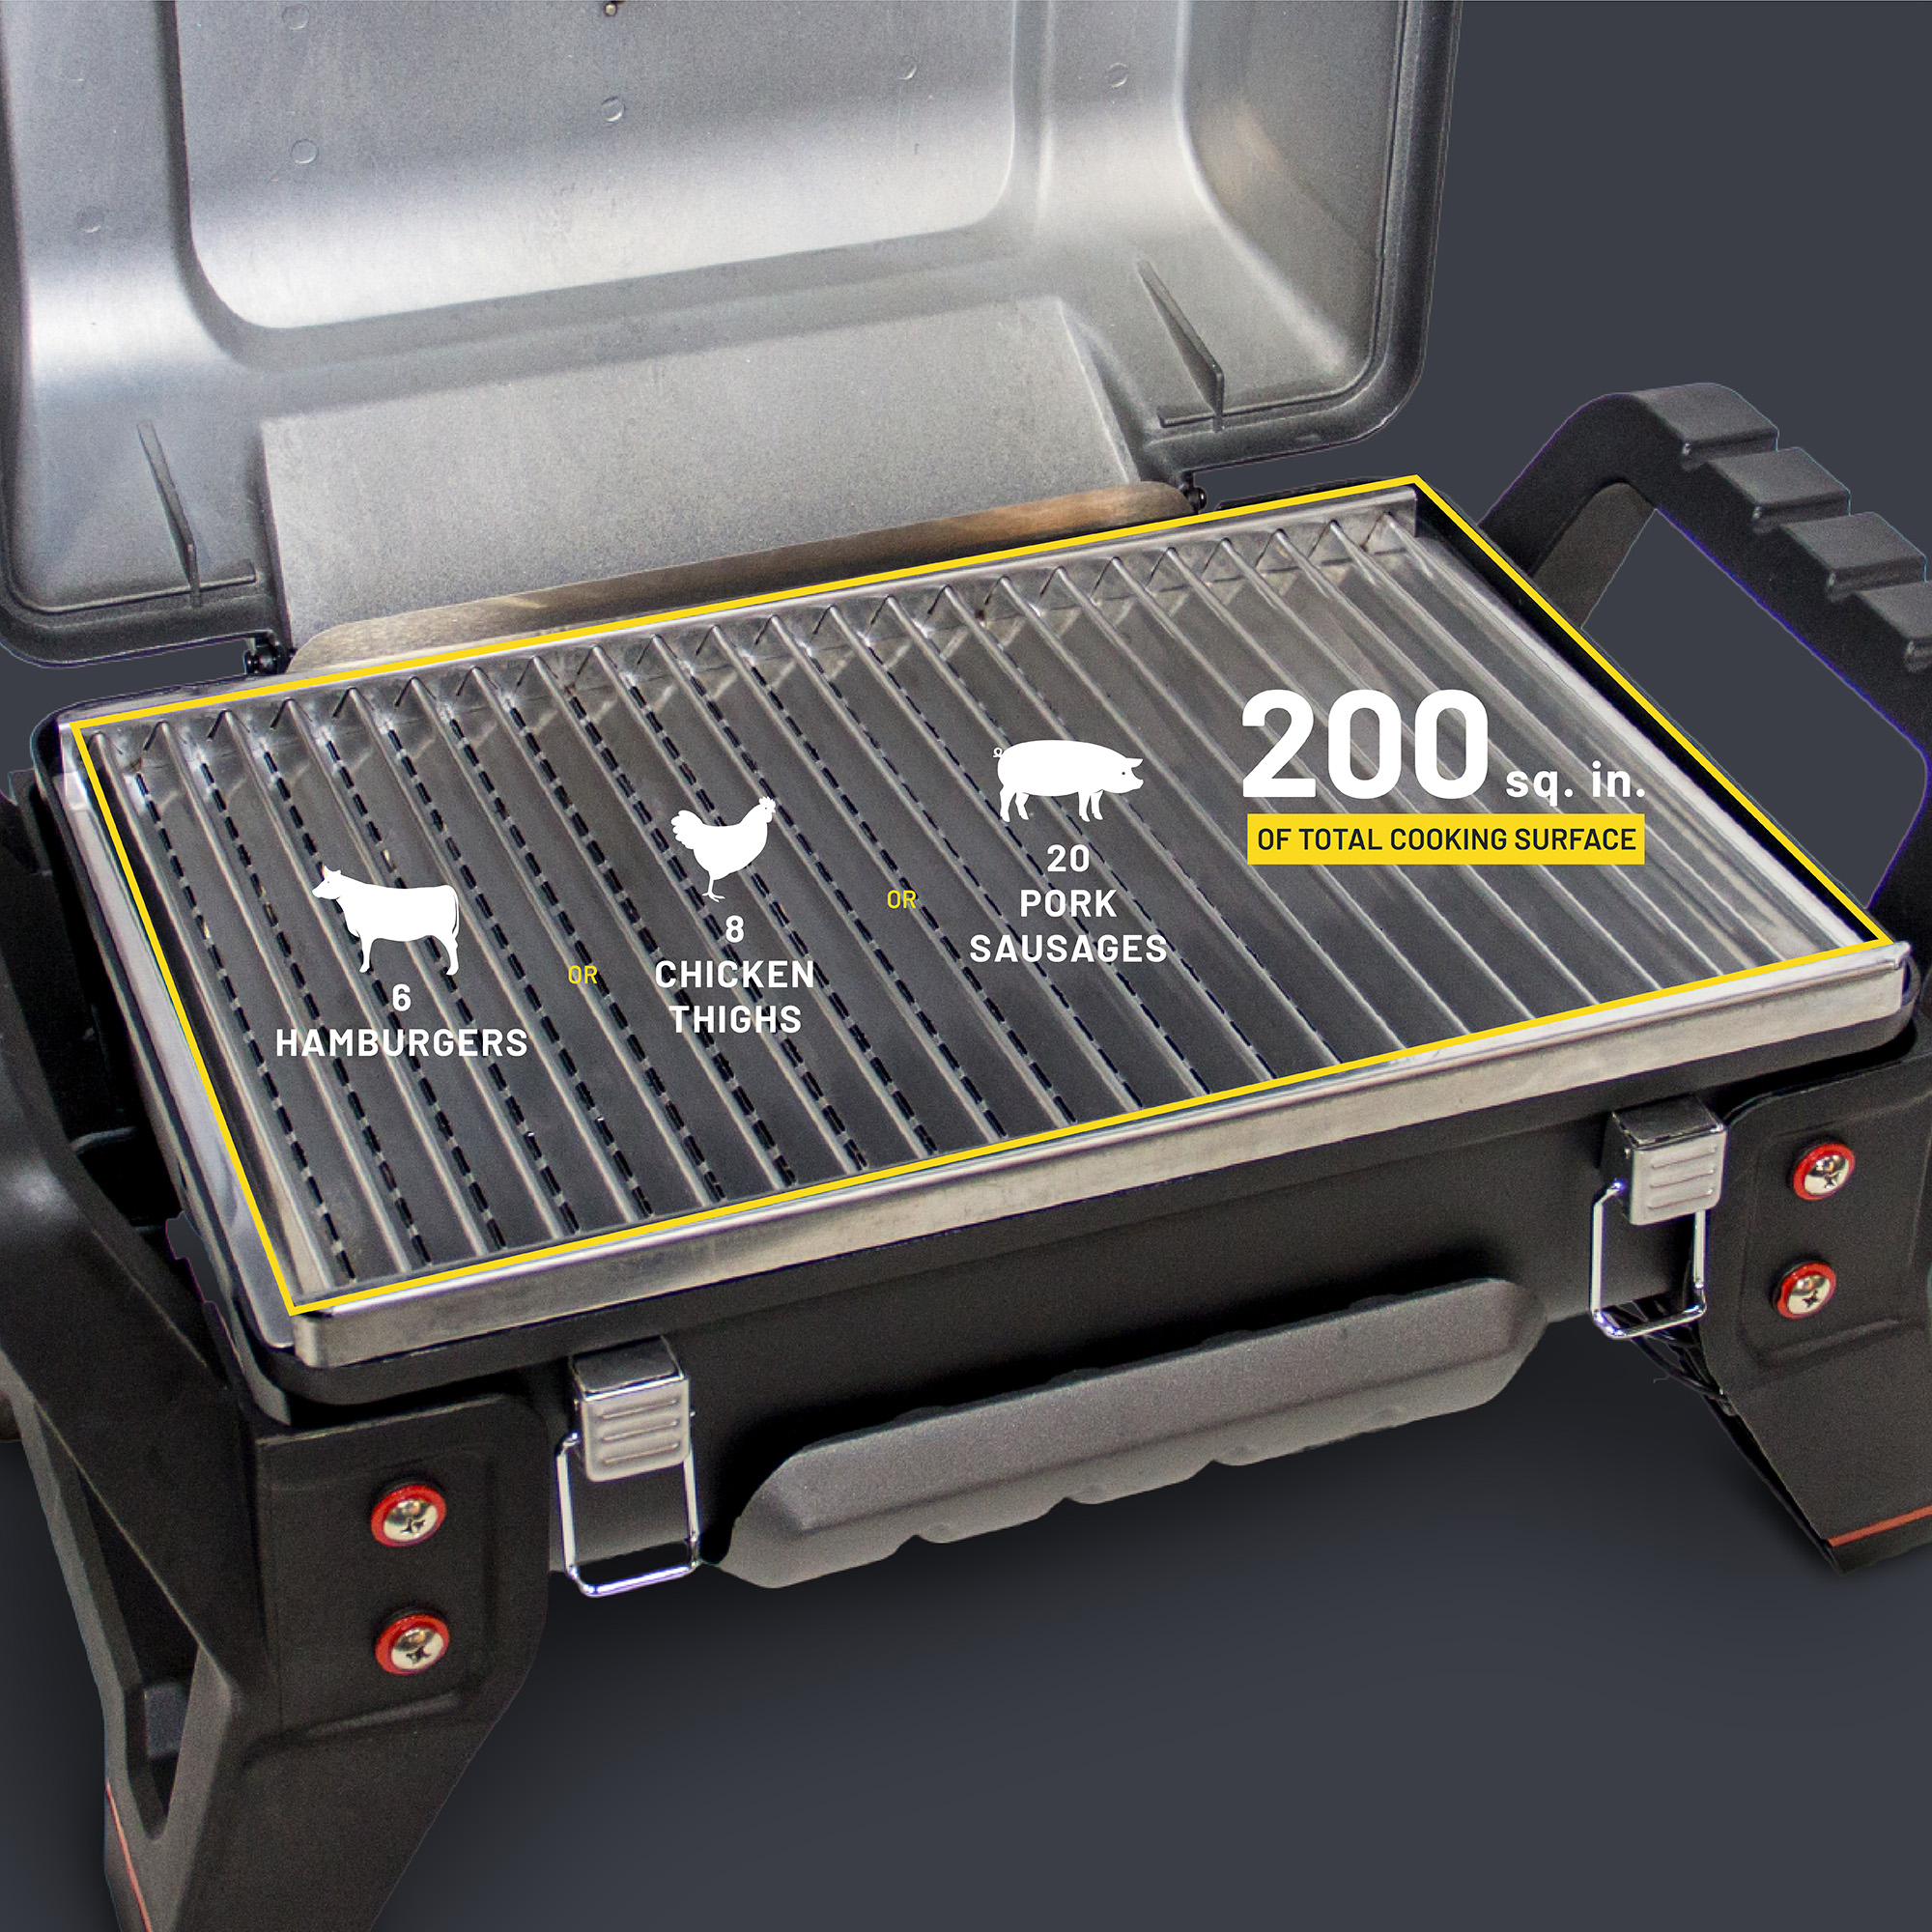 Char-Broil Grill2Go® Portable Gas Grill - image 4 of 12